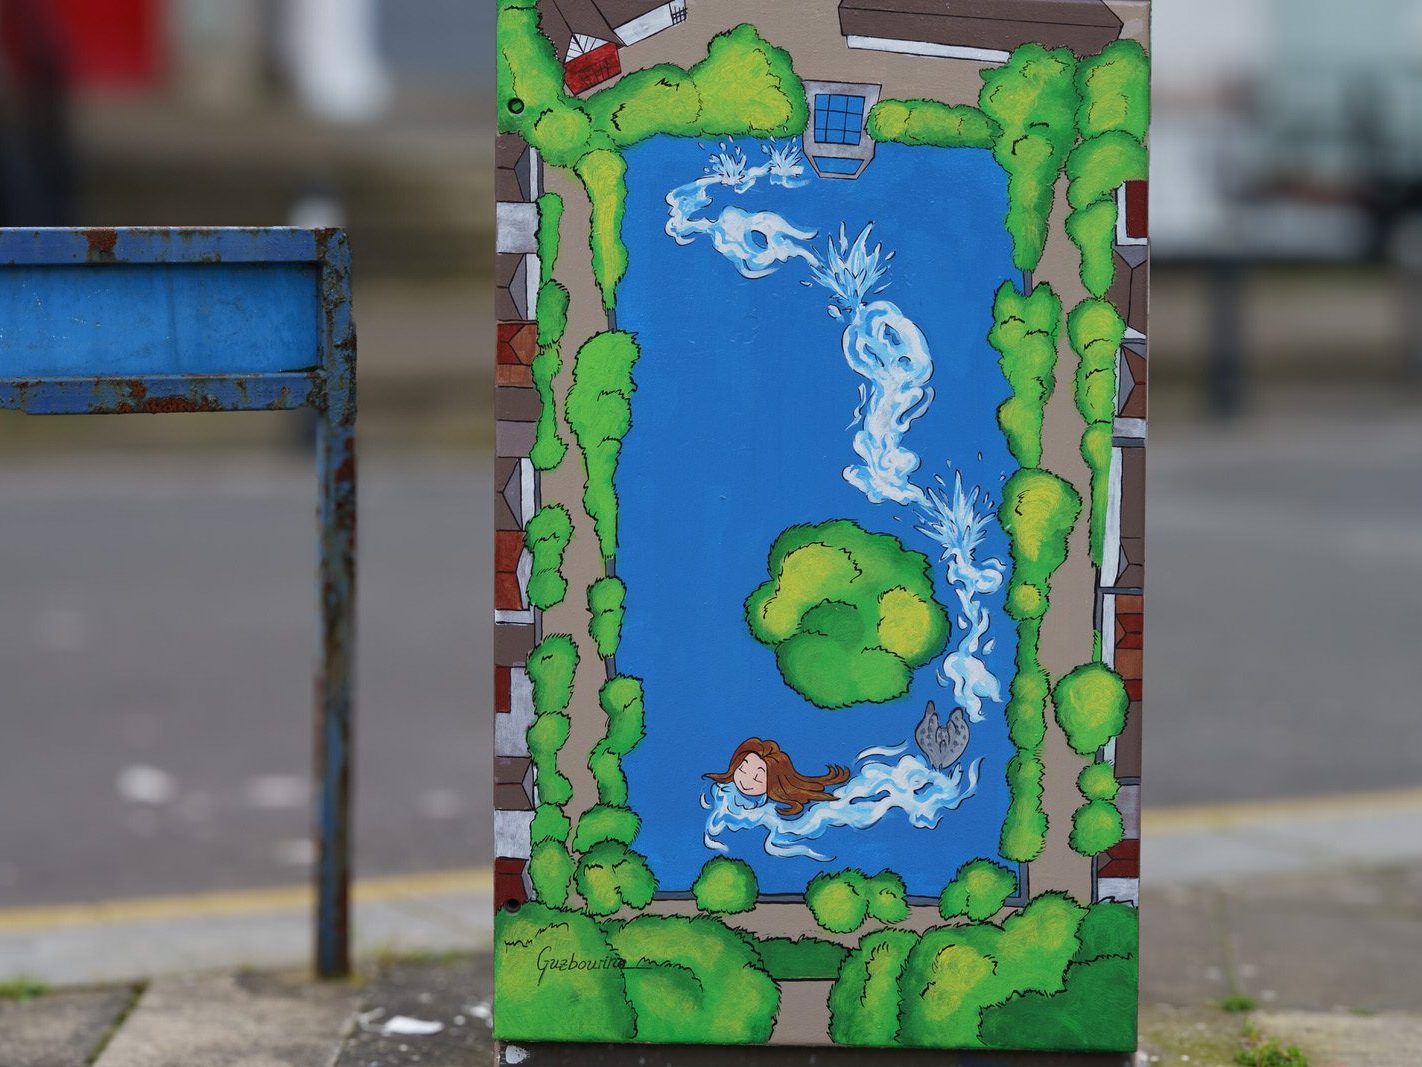 THE BASIN BY LAURA AND CHRISTINA [PAINT-A-BOX STREET ART]-228845-1